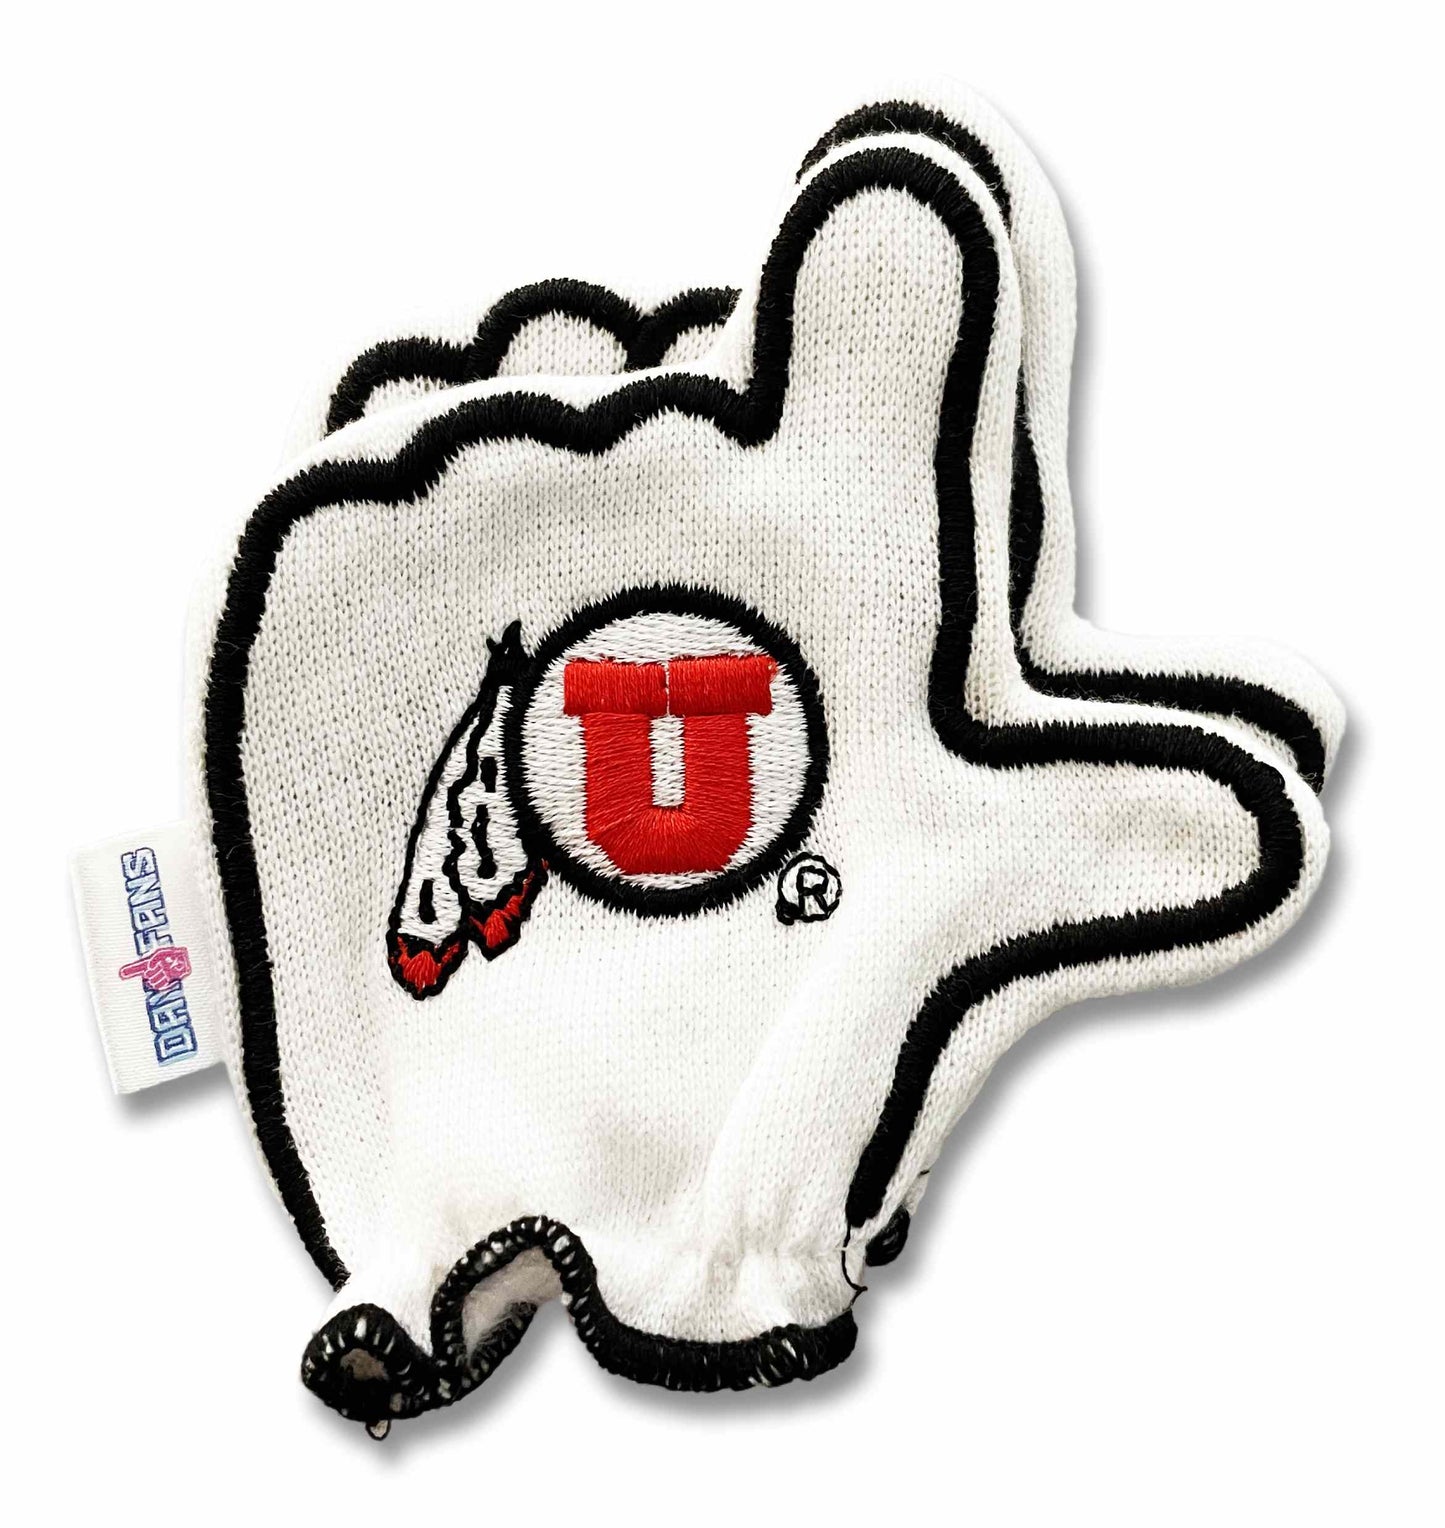 Utah Go Utes FanMitts Baby Mittens White Back Pair Stacked